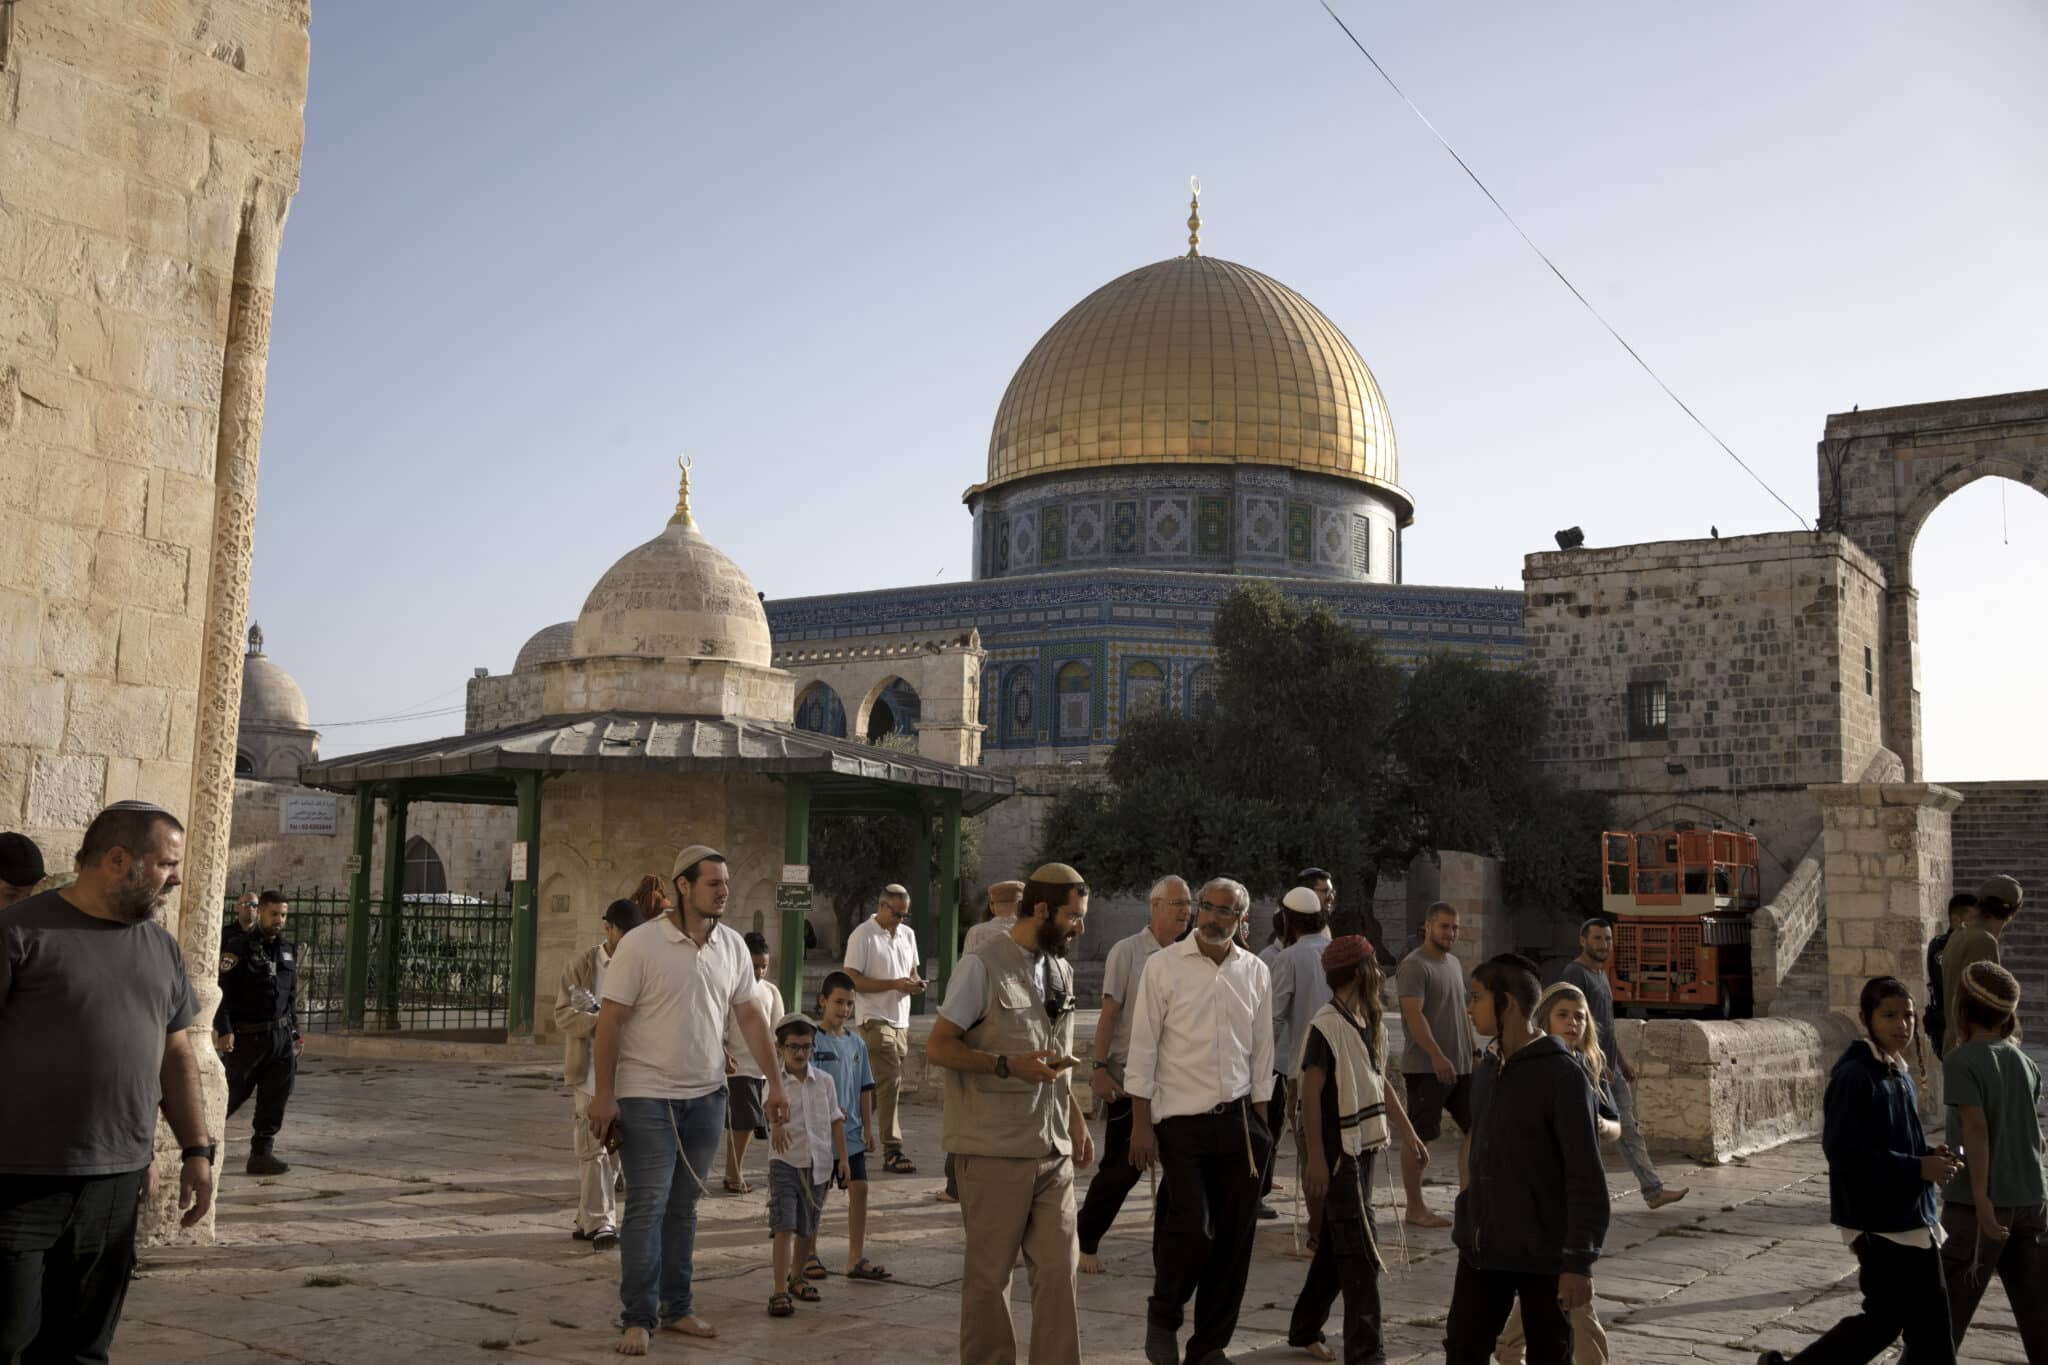 Jews visit the Temple Mount, known to Muslims as the Noble Sanctuary, on the Al-Aqsa Mosque compound in the Old City of Jerusalem, on the morning before Rosh Hashana, the Jewish New Year, which begins at sundown, Sunday, Sept. 25, 2022. (AP Photo/ Maya Alleruzzo)